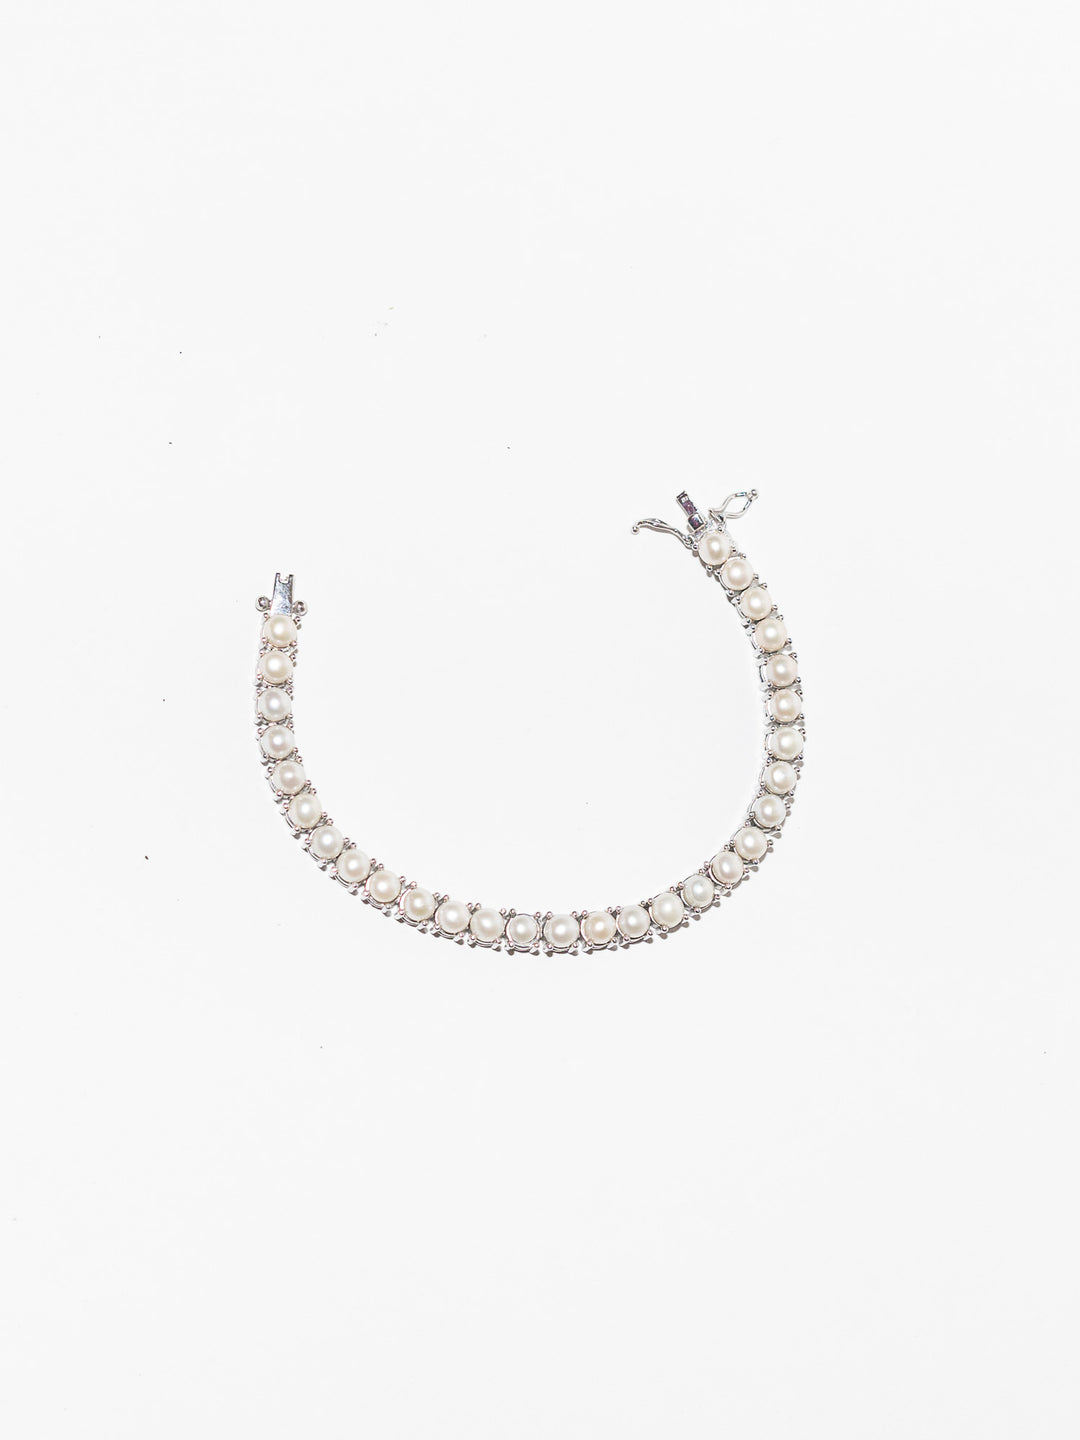 PEARL AND SILVER TENNIS BRACELET